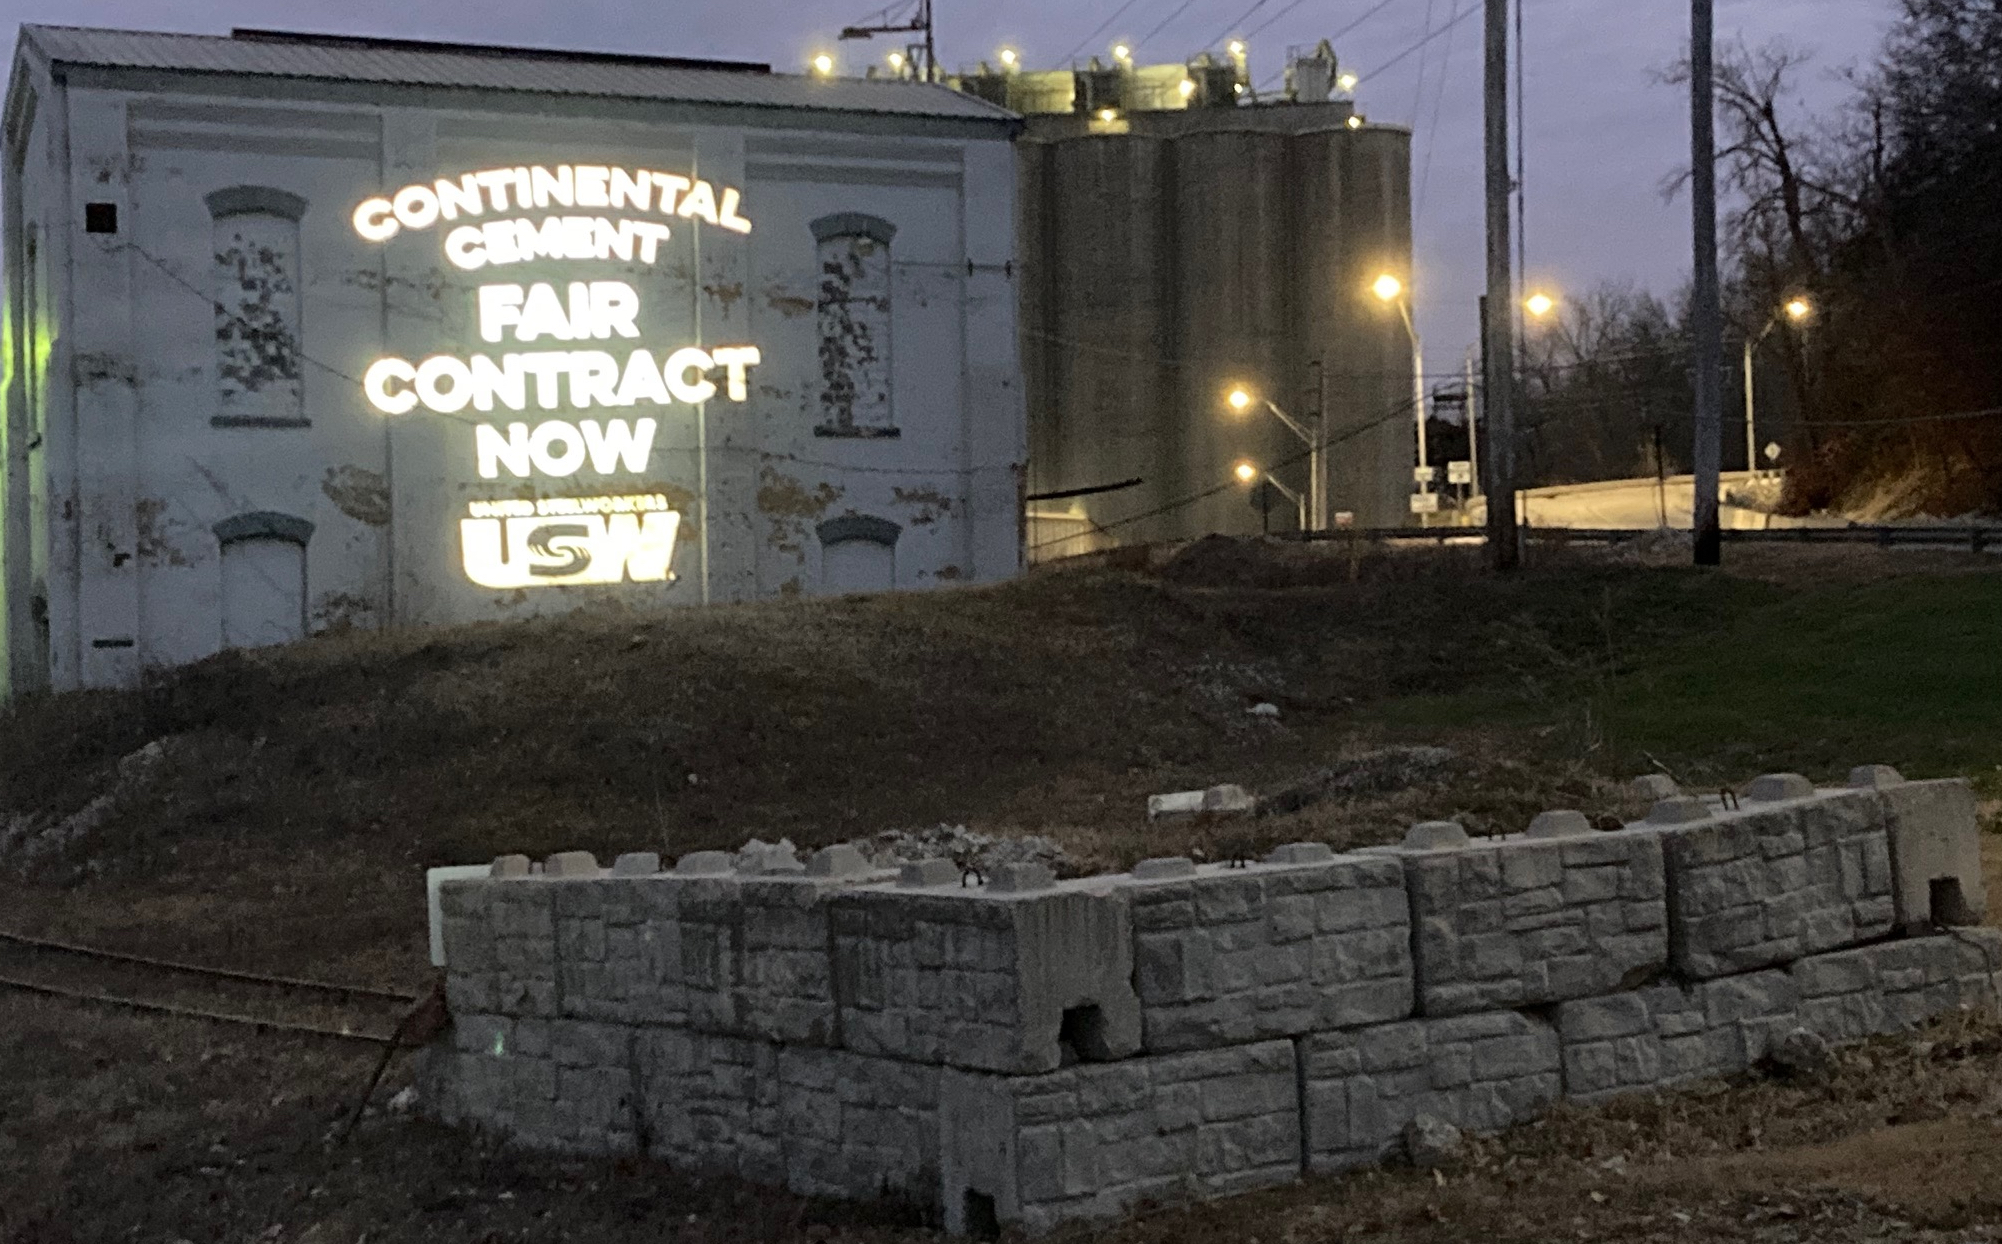 Union Employees At Continental Cement